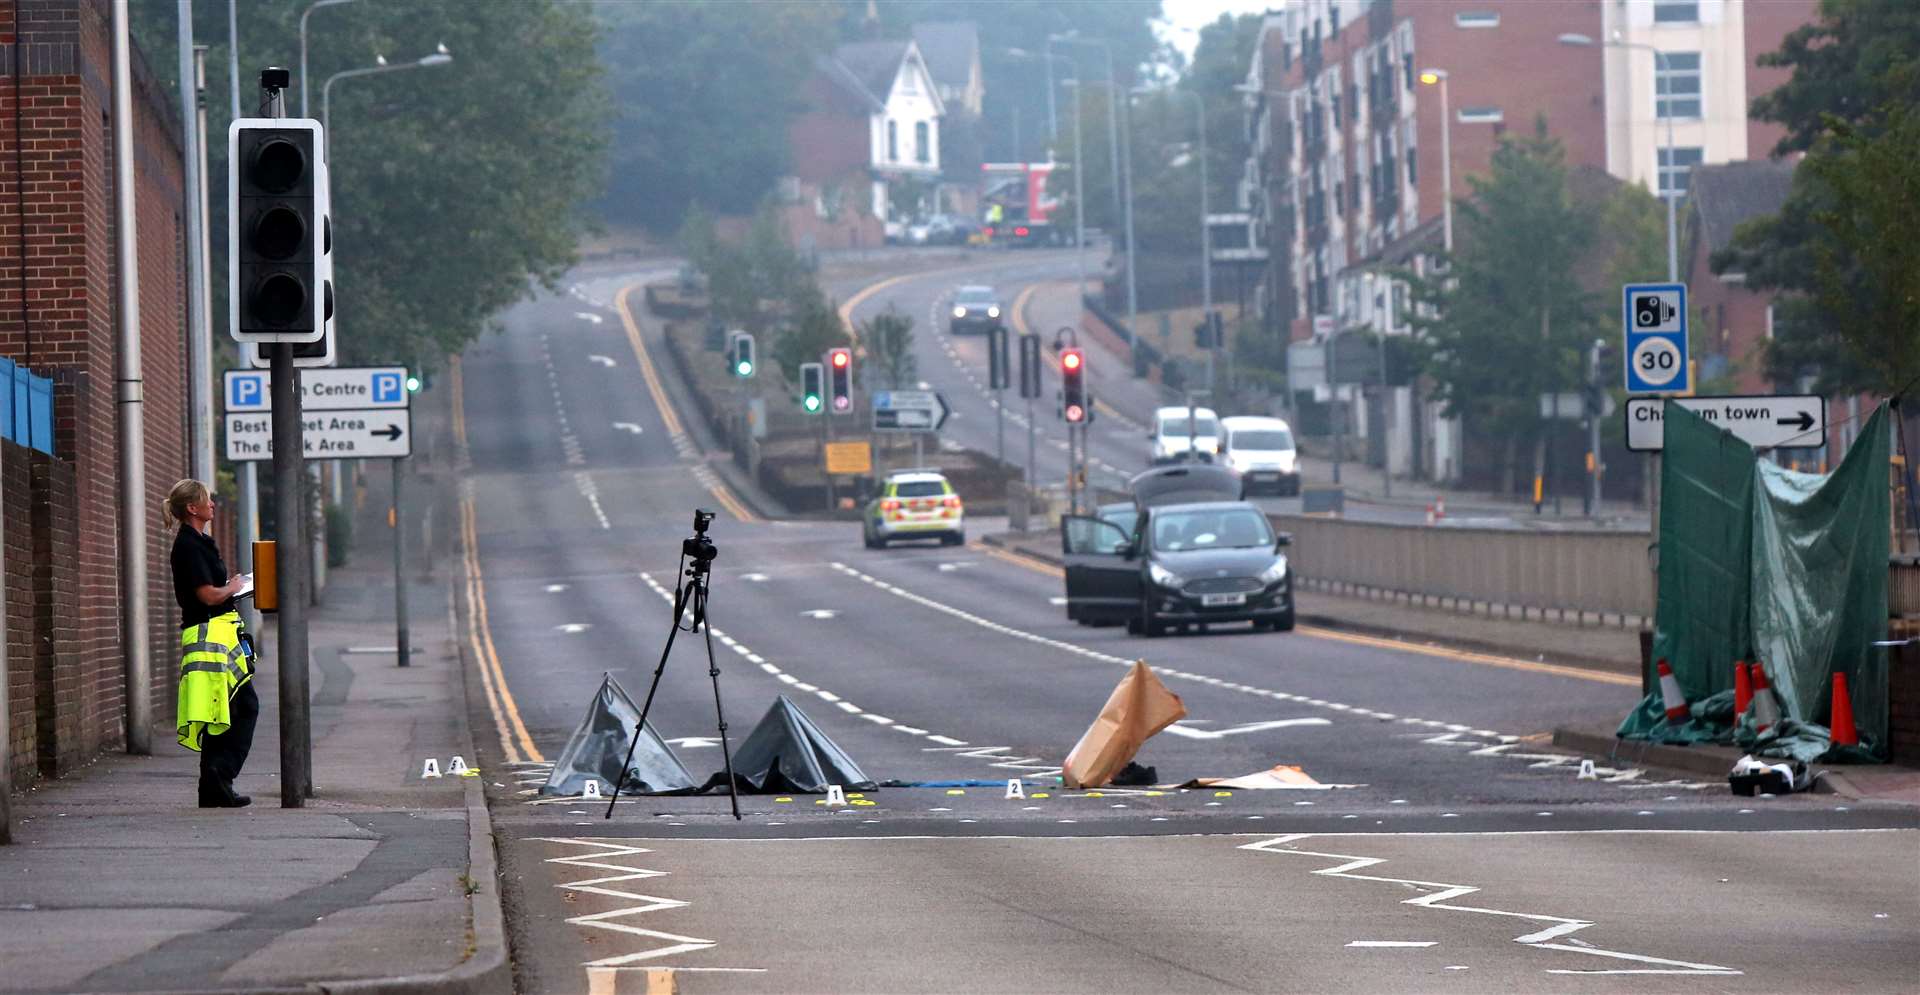 Police at the scene of a crash in New Road, Chatham. Images: UKNiP